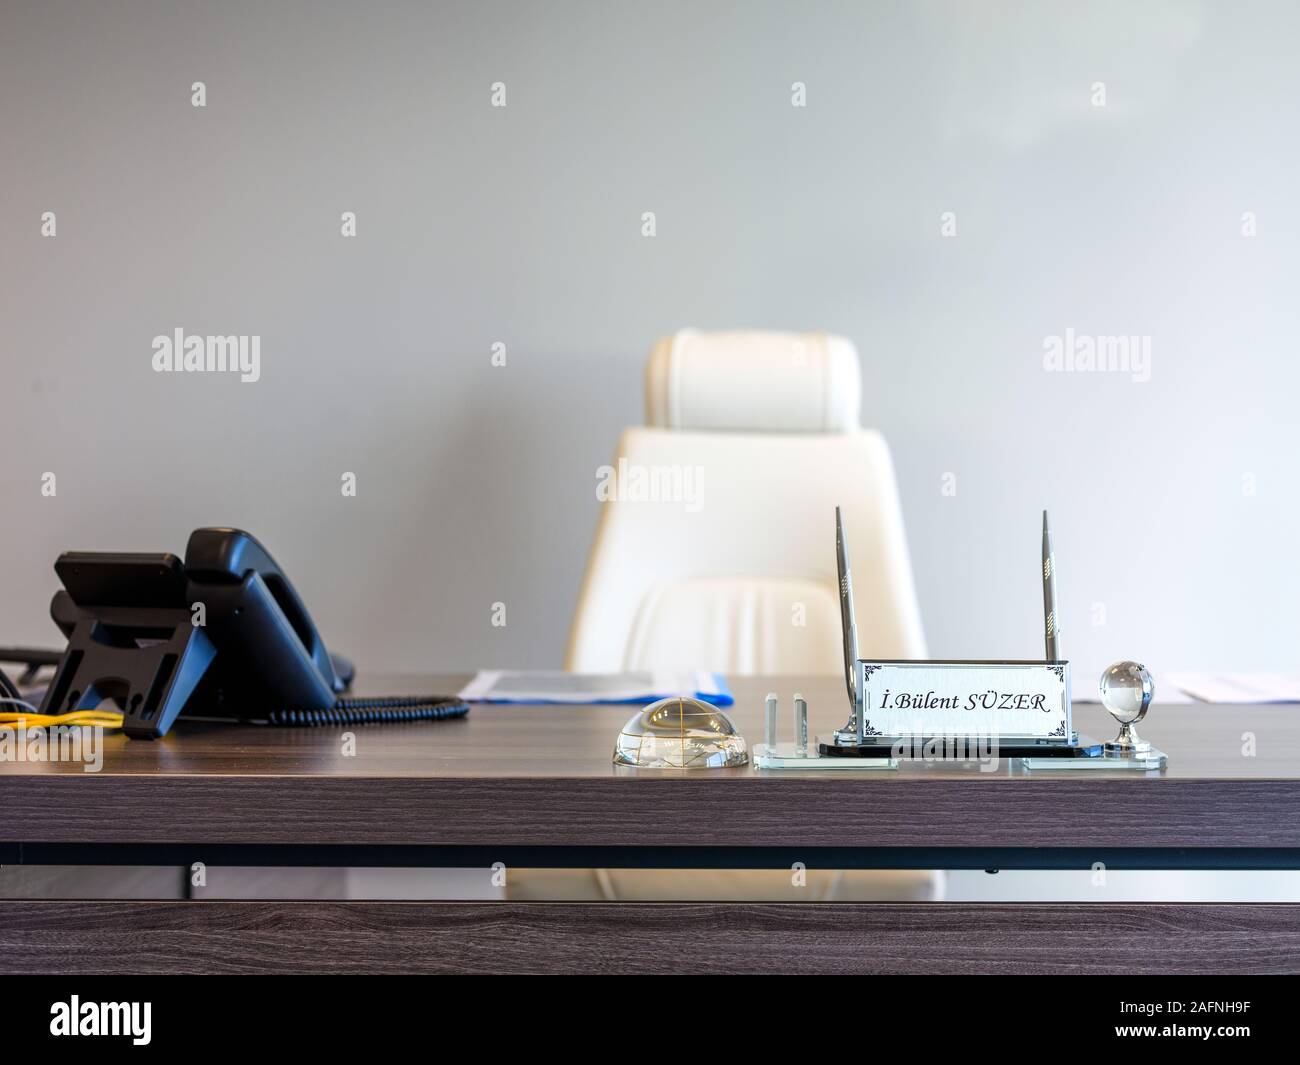 name Holder on the office chair and desk Stock Photo